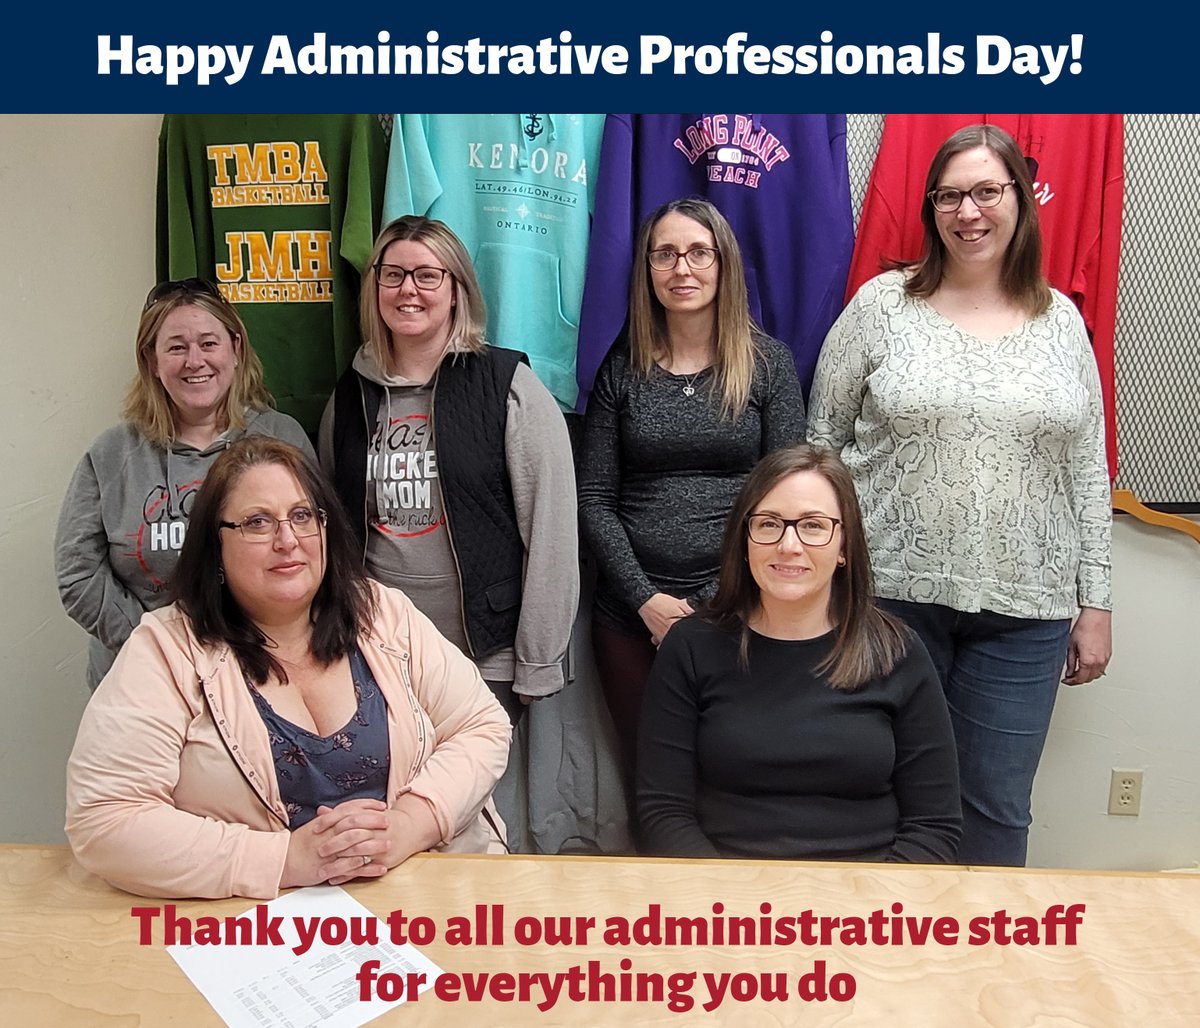 Happy Administrative Professionals Day! From our Truro location. From top left to right we have Shelley Dunphy, Dalce Shipley, Stephanie Parry, Heather Ettinger, Tanya Wilton, and Ashley Foster. Also a shout out to Jill Tourneur and MacKenzie Merchant. #FundyFamily